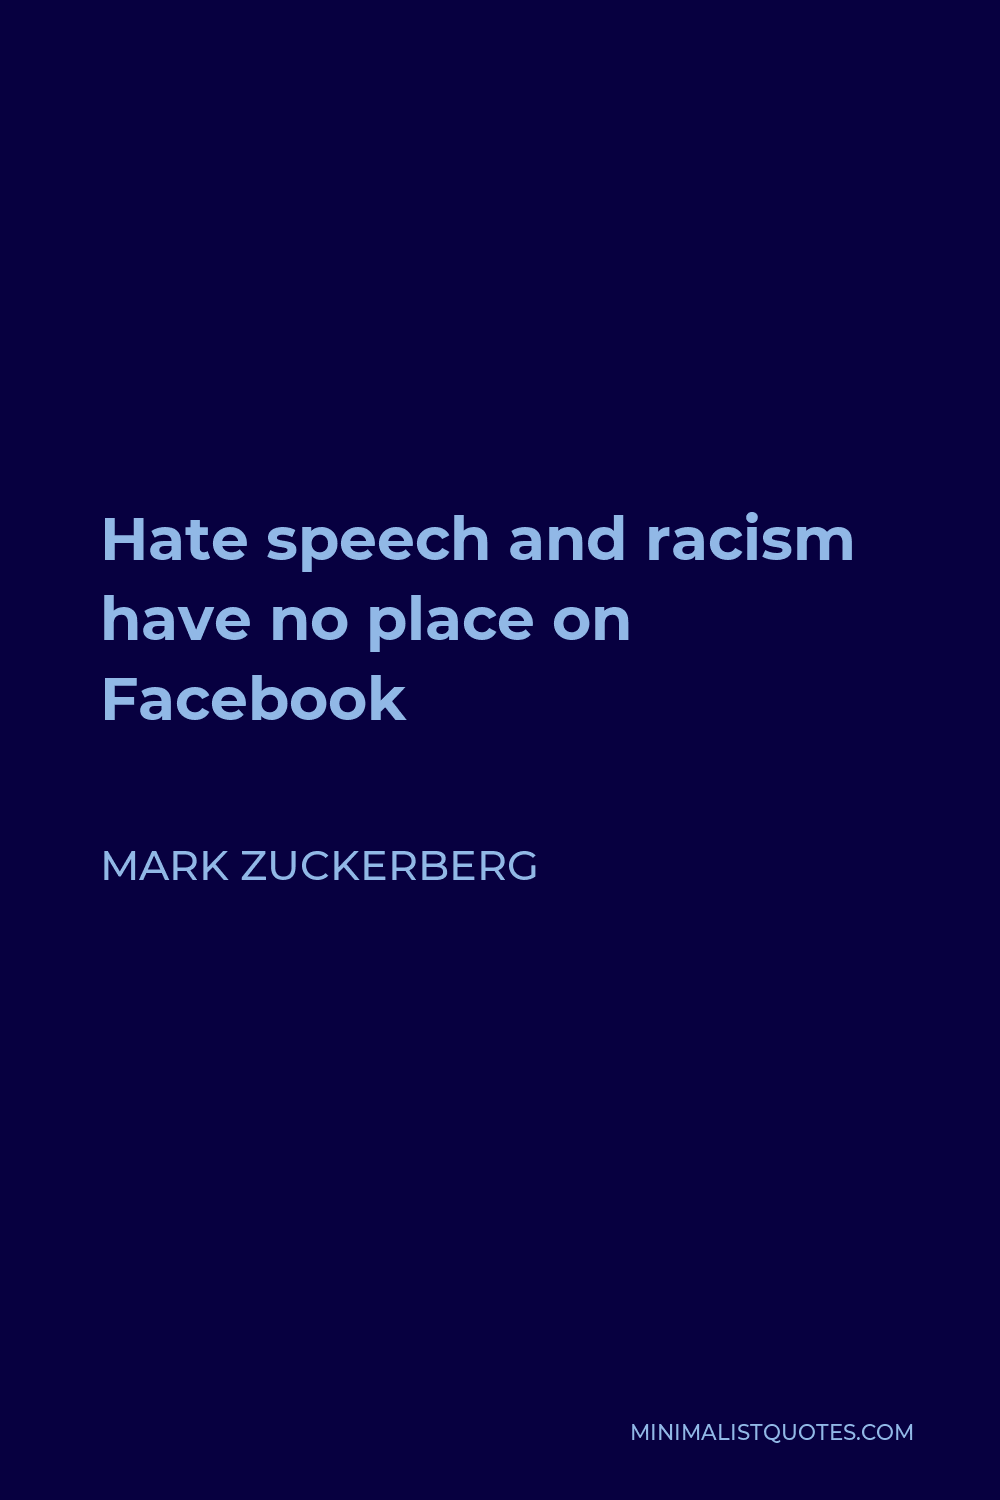 Mark Zuckerberg Quote - Hate speech and racism have no place on Facebook